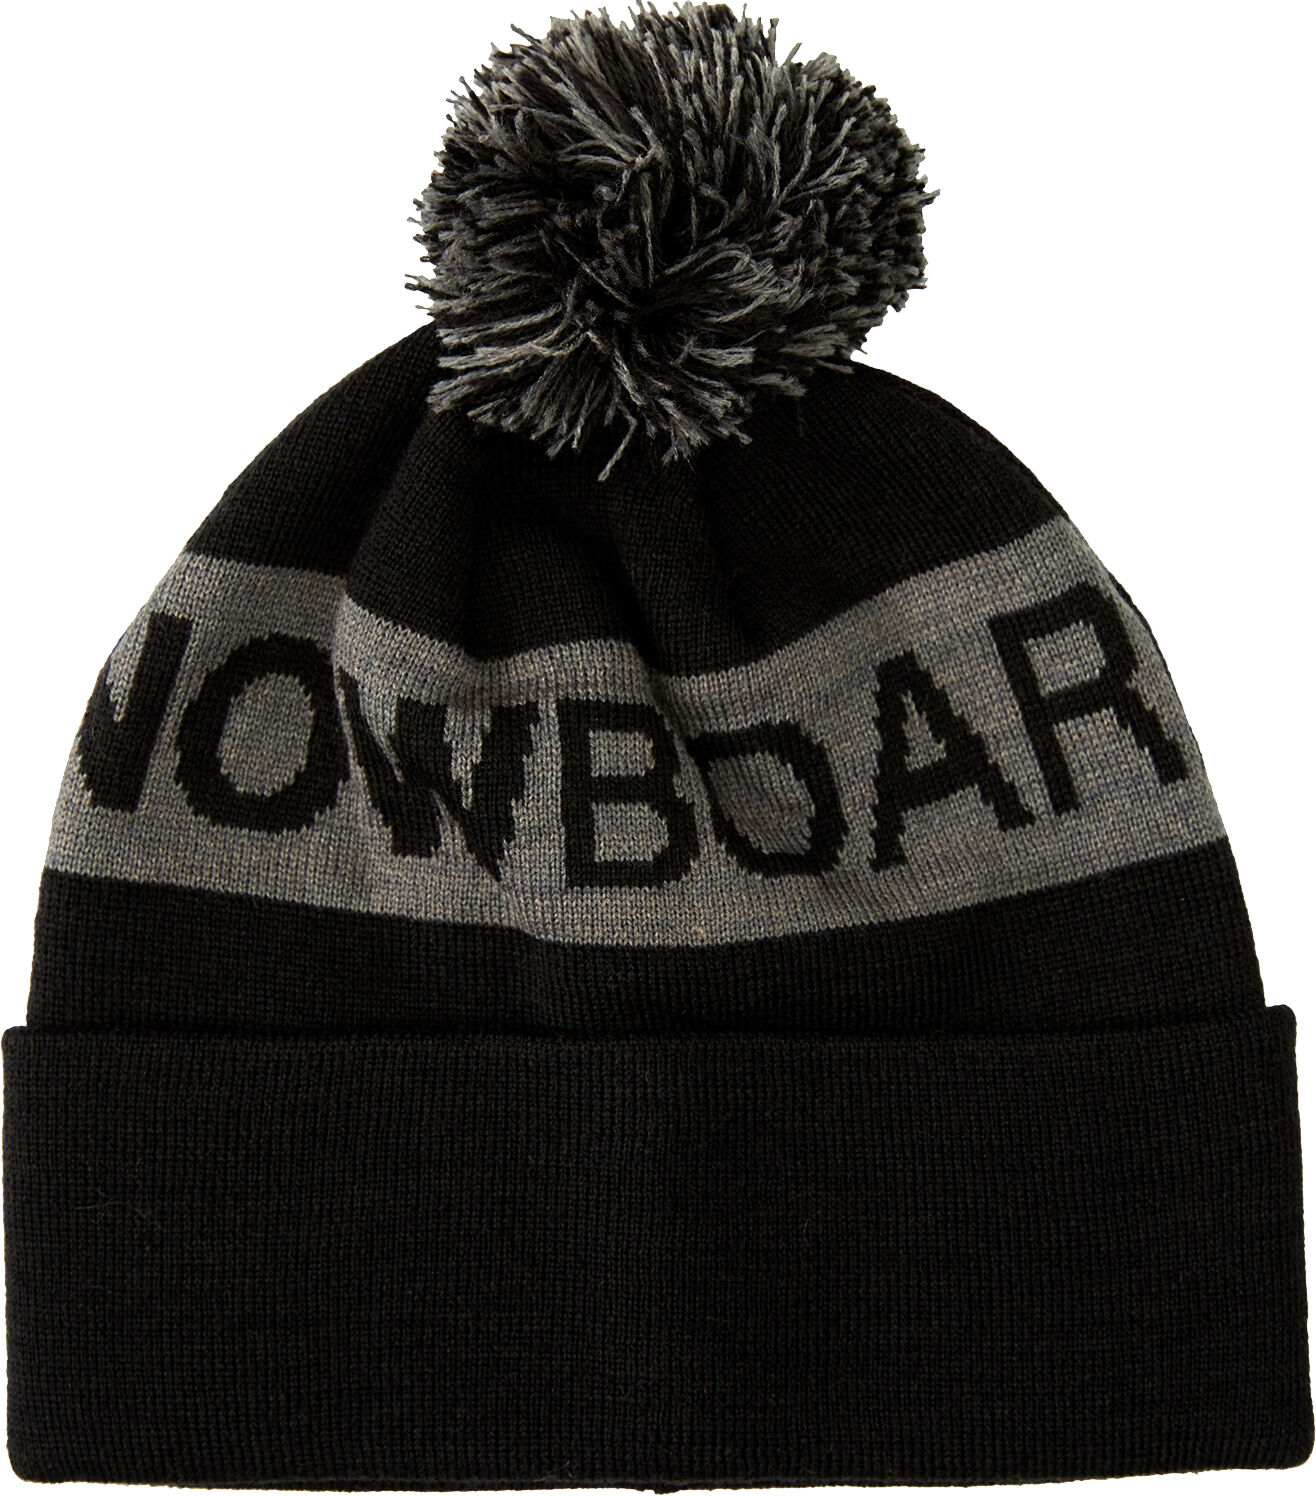 DCShoe CHESTER YOUTH BEANIE BLACK One Size